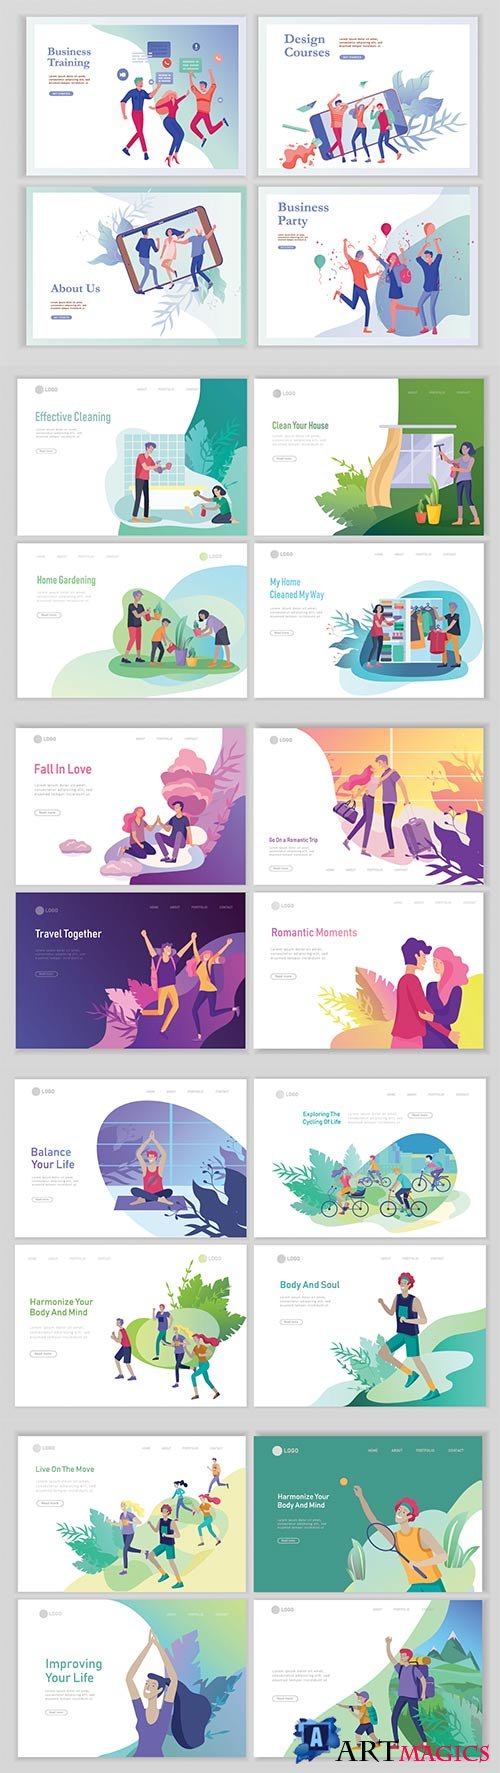 Website page isometric vector, flat banner concept illustration